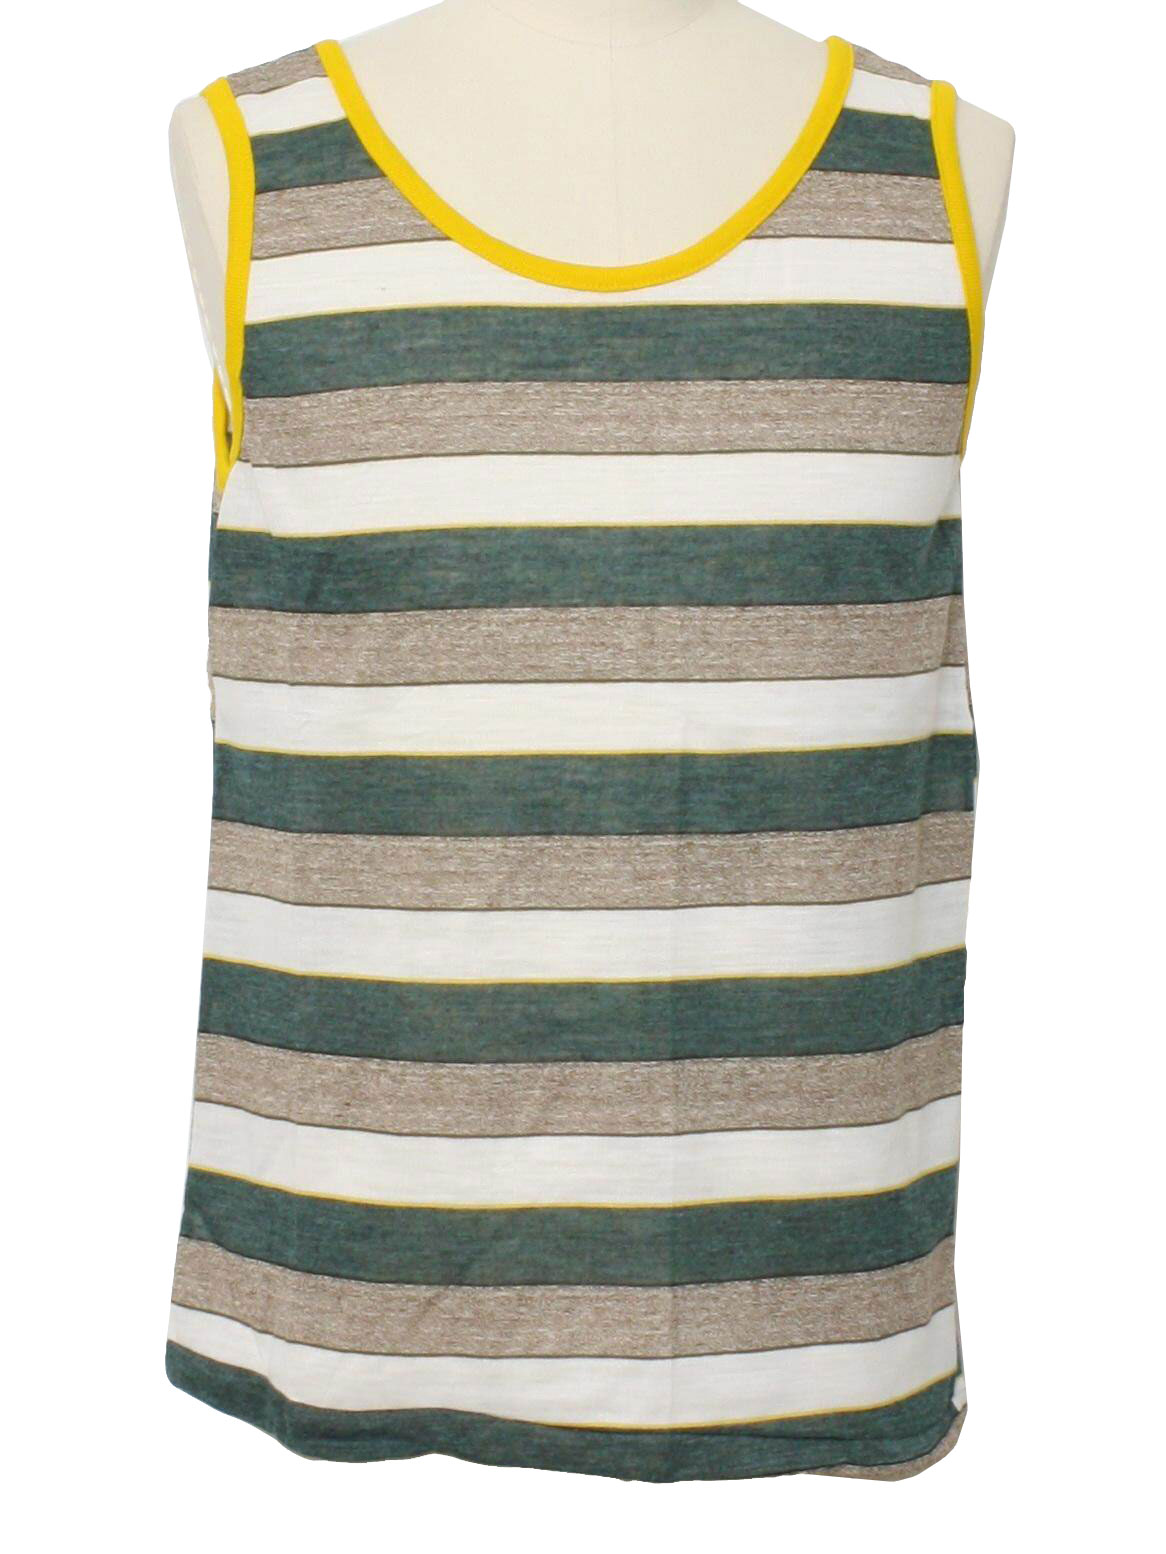 Vintage Stratford Seventies T Shirt: 70s -Stratford- Mens white, teal green, shaded blue and yellow banded horizontal stripe print cotton muscle t shirt with tank straps, rounded neckline and box cut